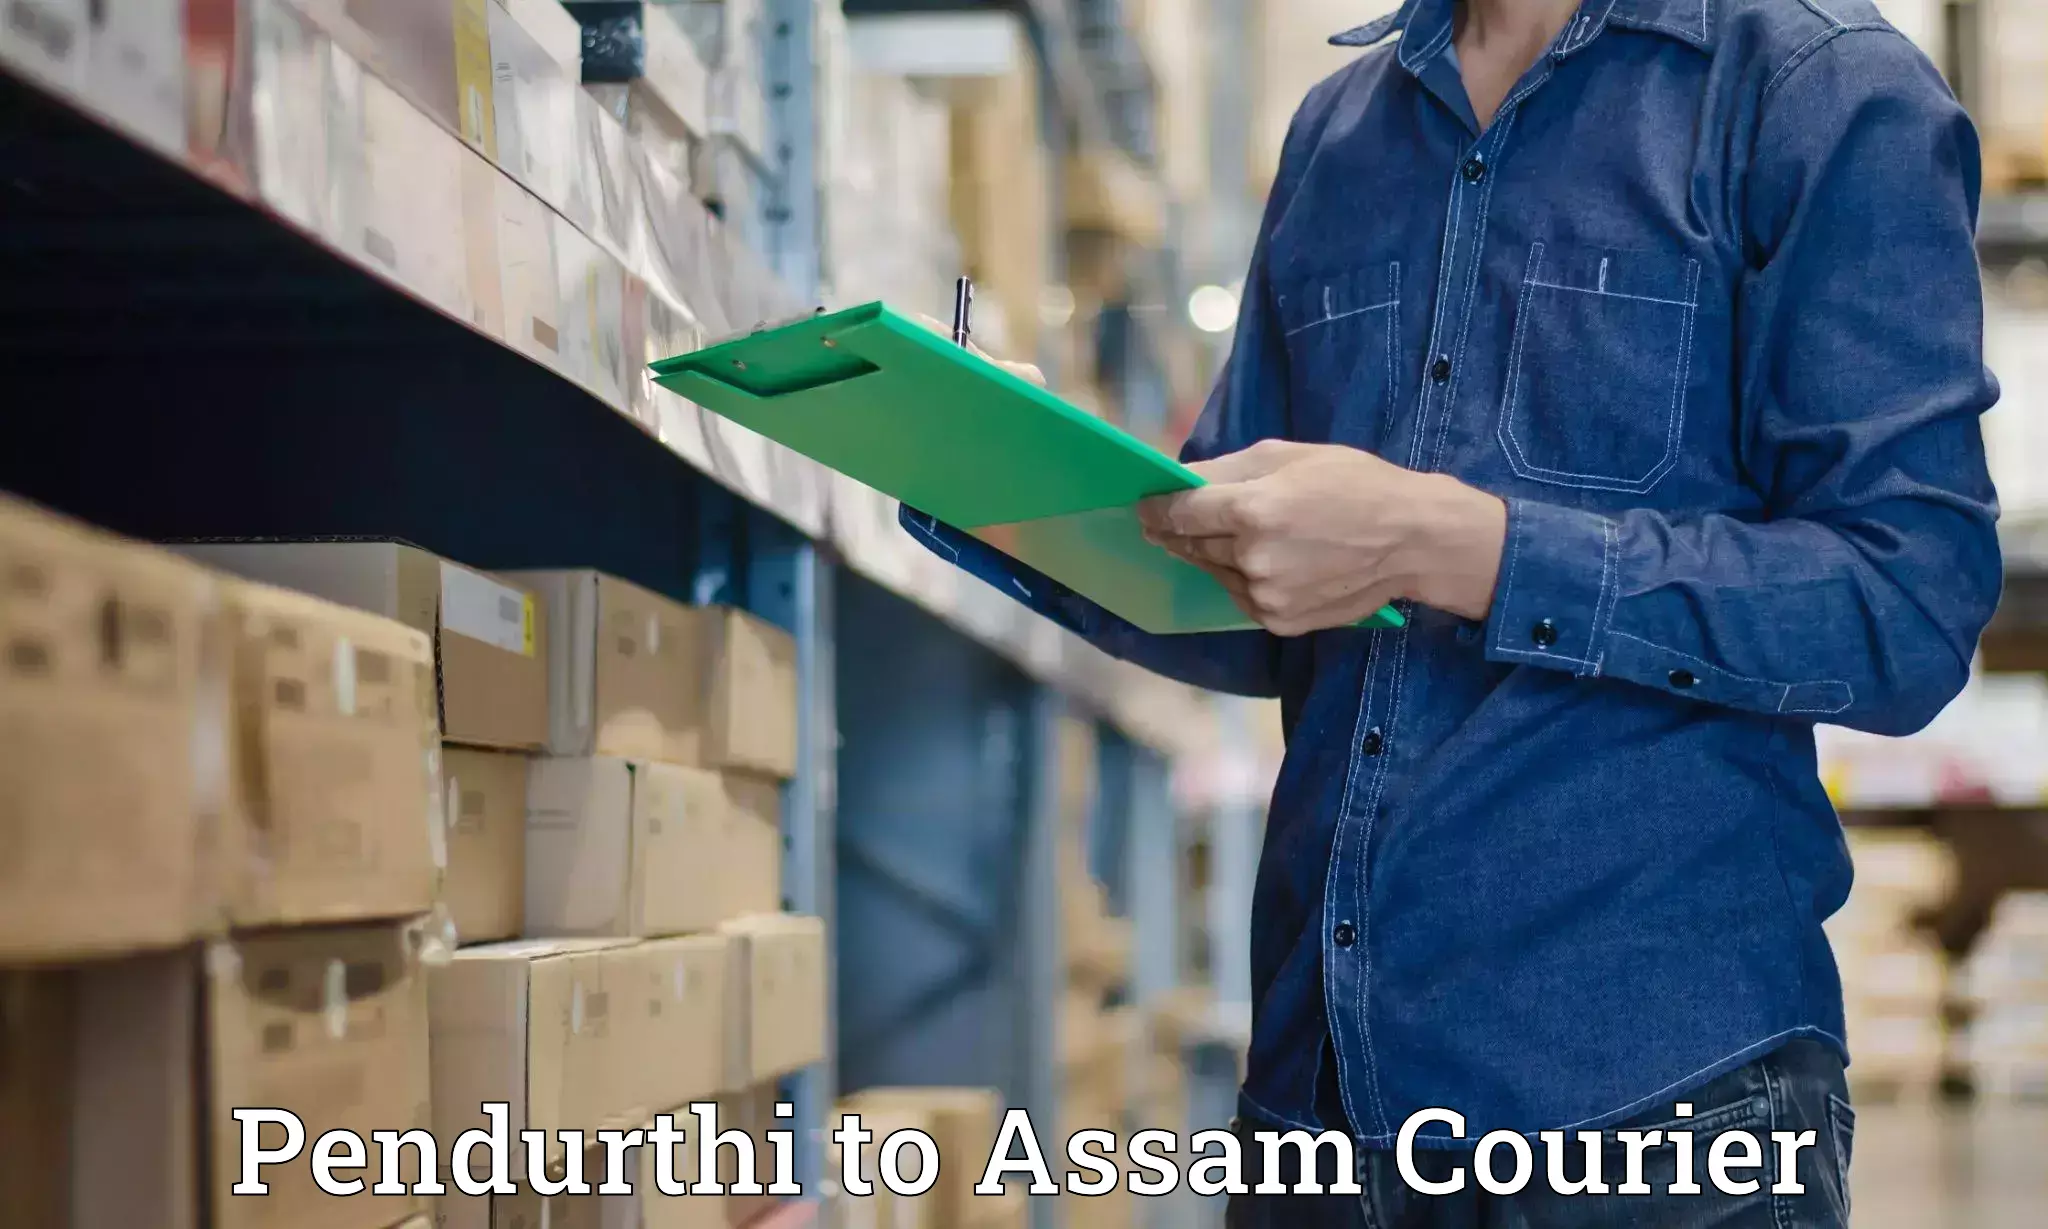 Enhanced tracking features in Pendurthi to Lala Assam